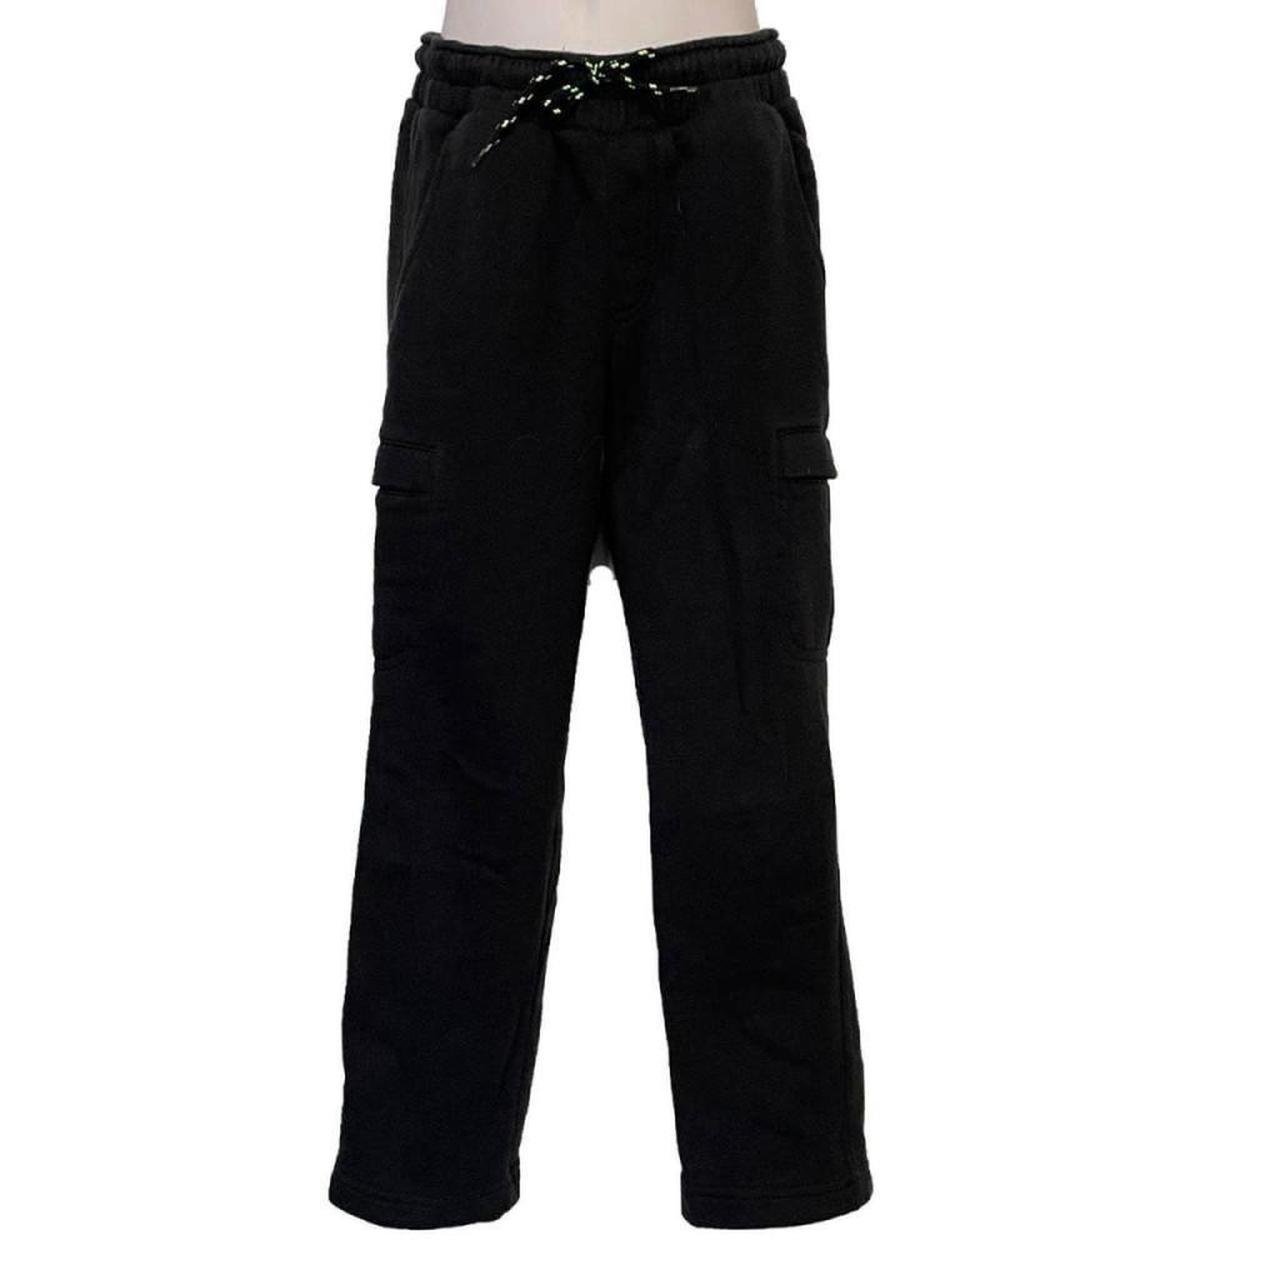 Athletic Works Cargo Athletic Pants for Women